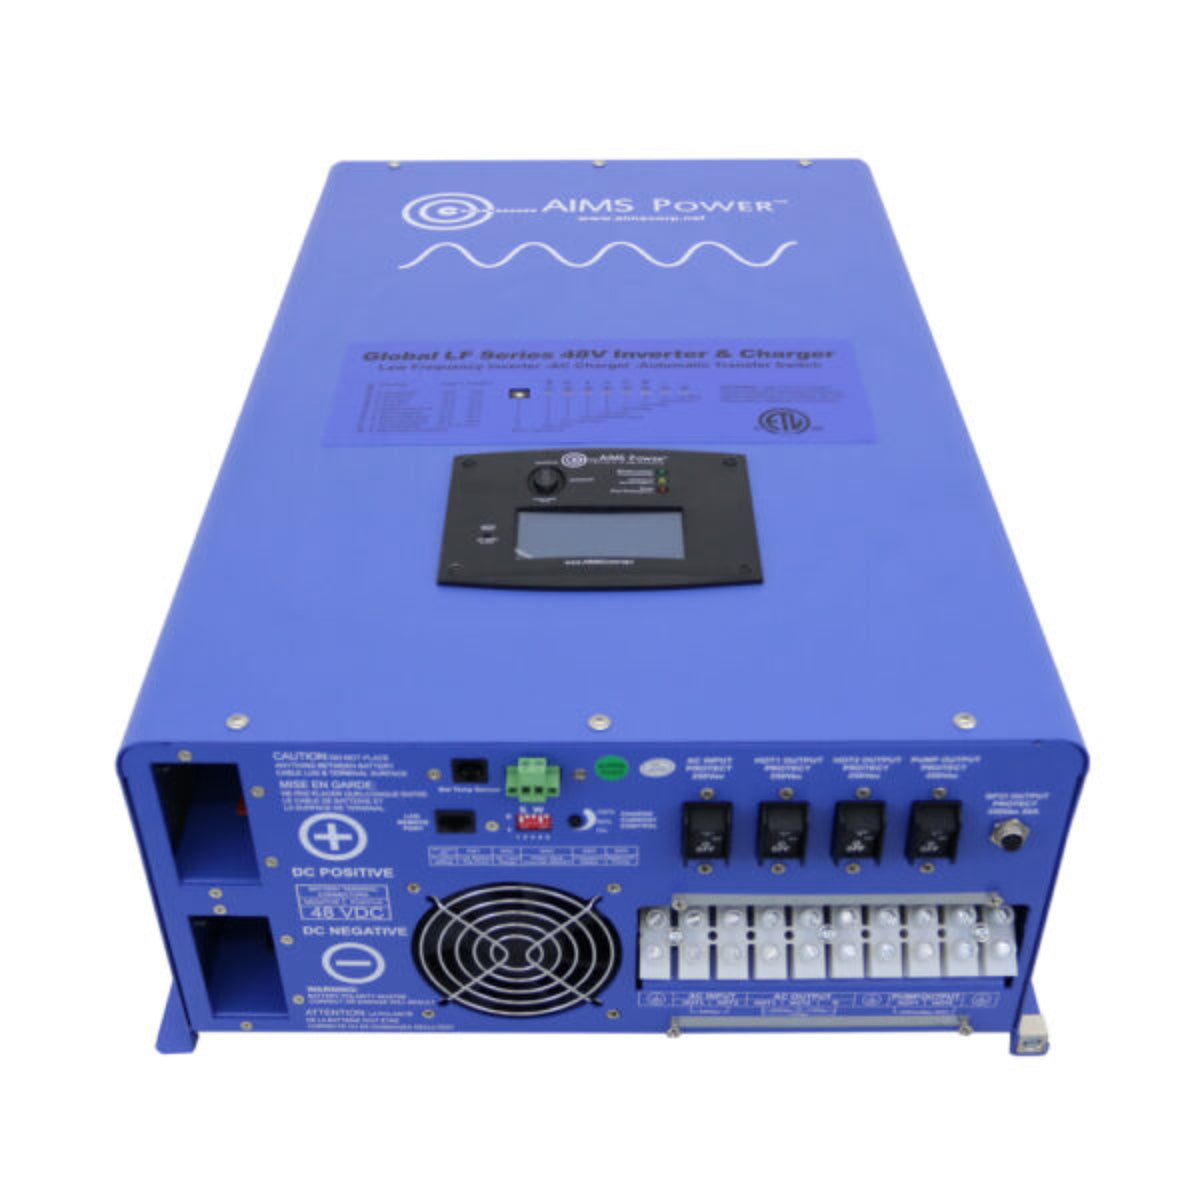 AIMS Power | 8000 Watt Pure Sine Inverter Charger 48 Vdc / 240Vac Input &amp; 120/240Vac Split Phase Output ETL Listed to UL 1741